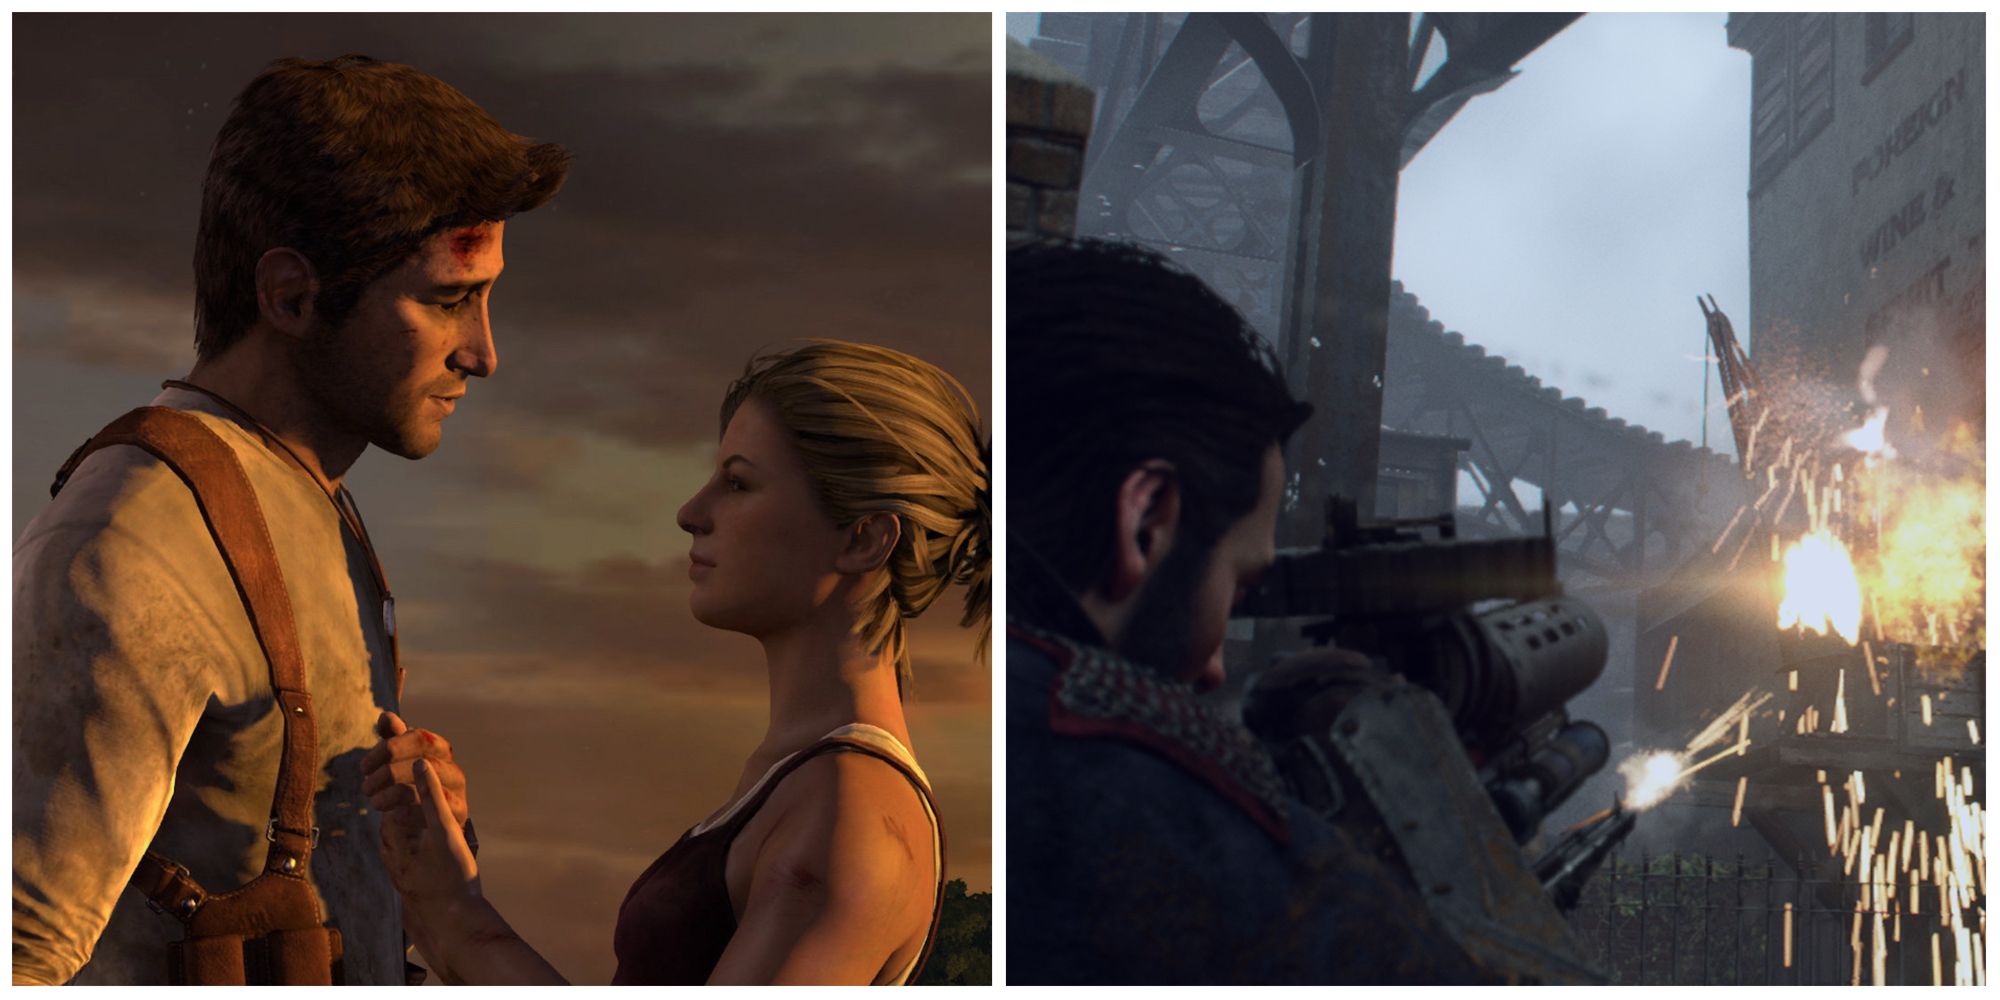 Uncharted and The Order